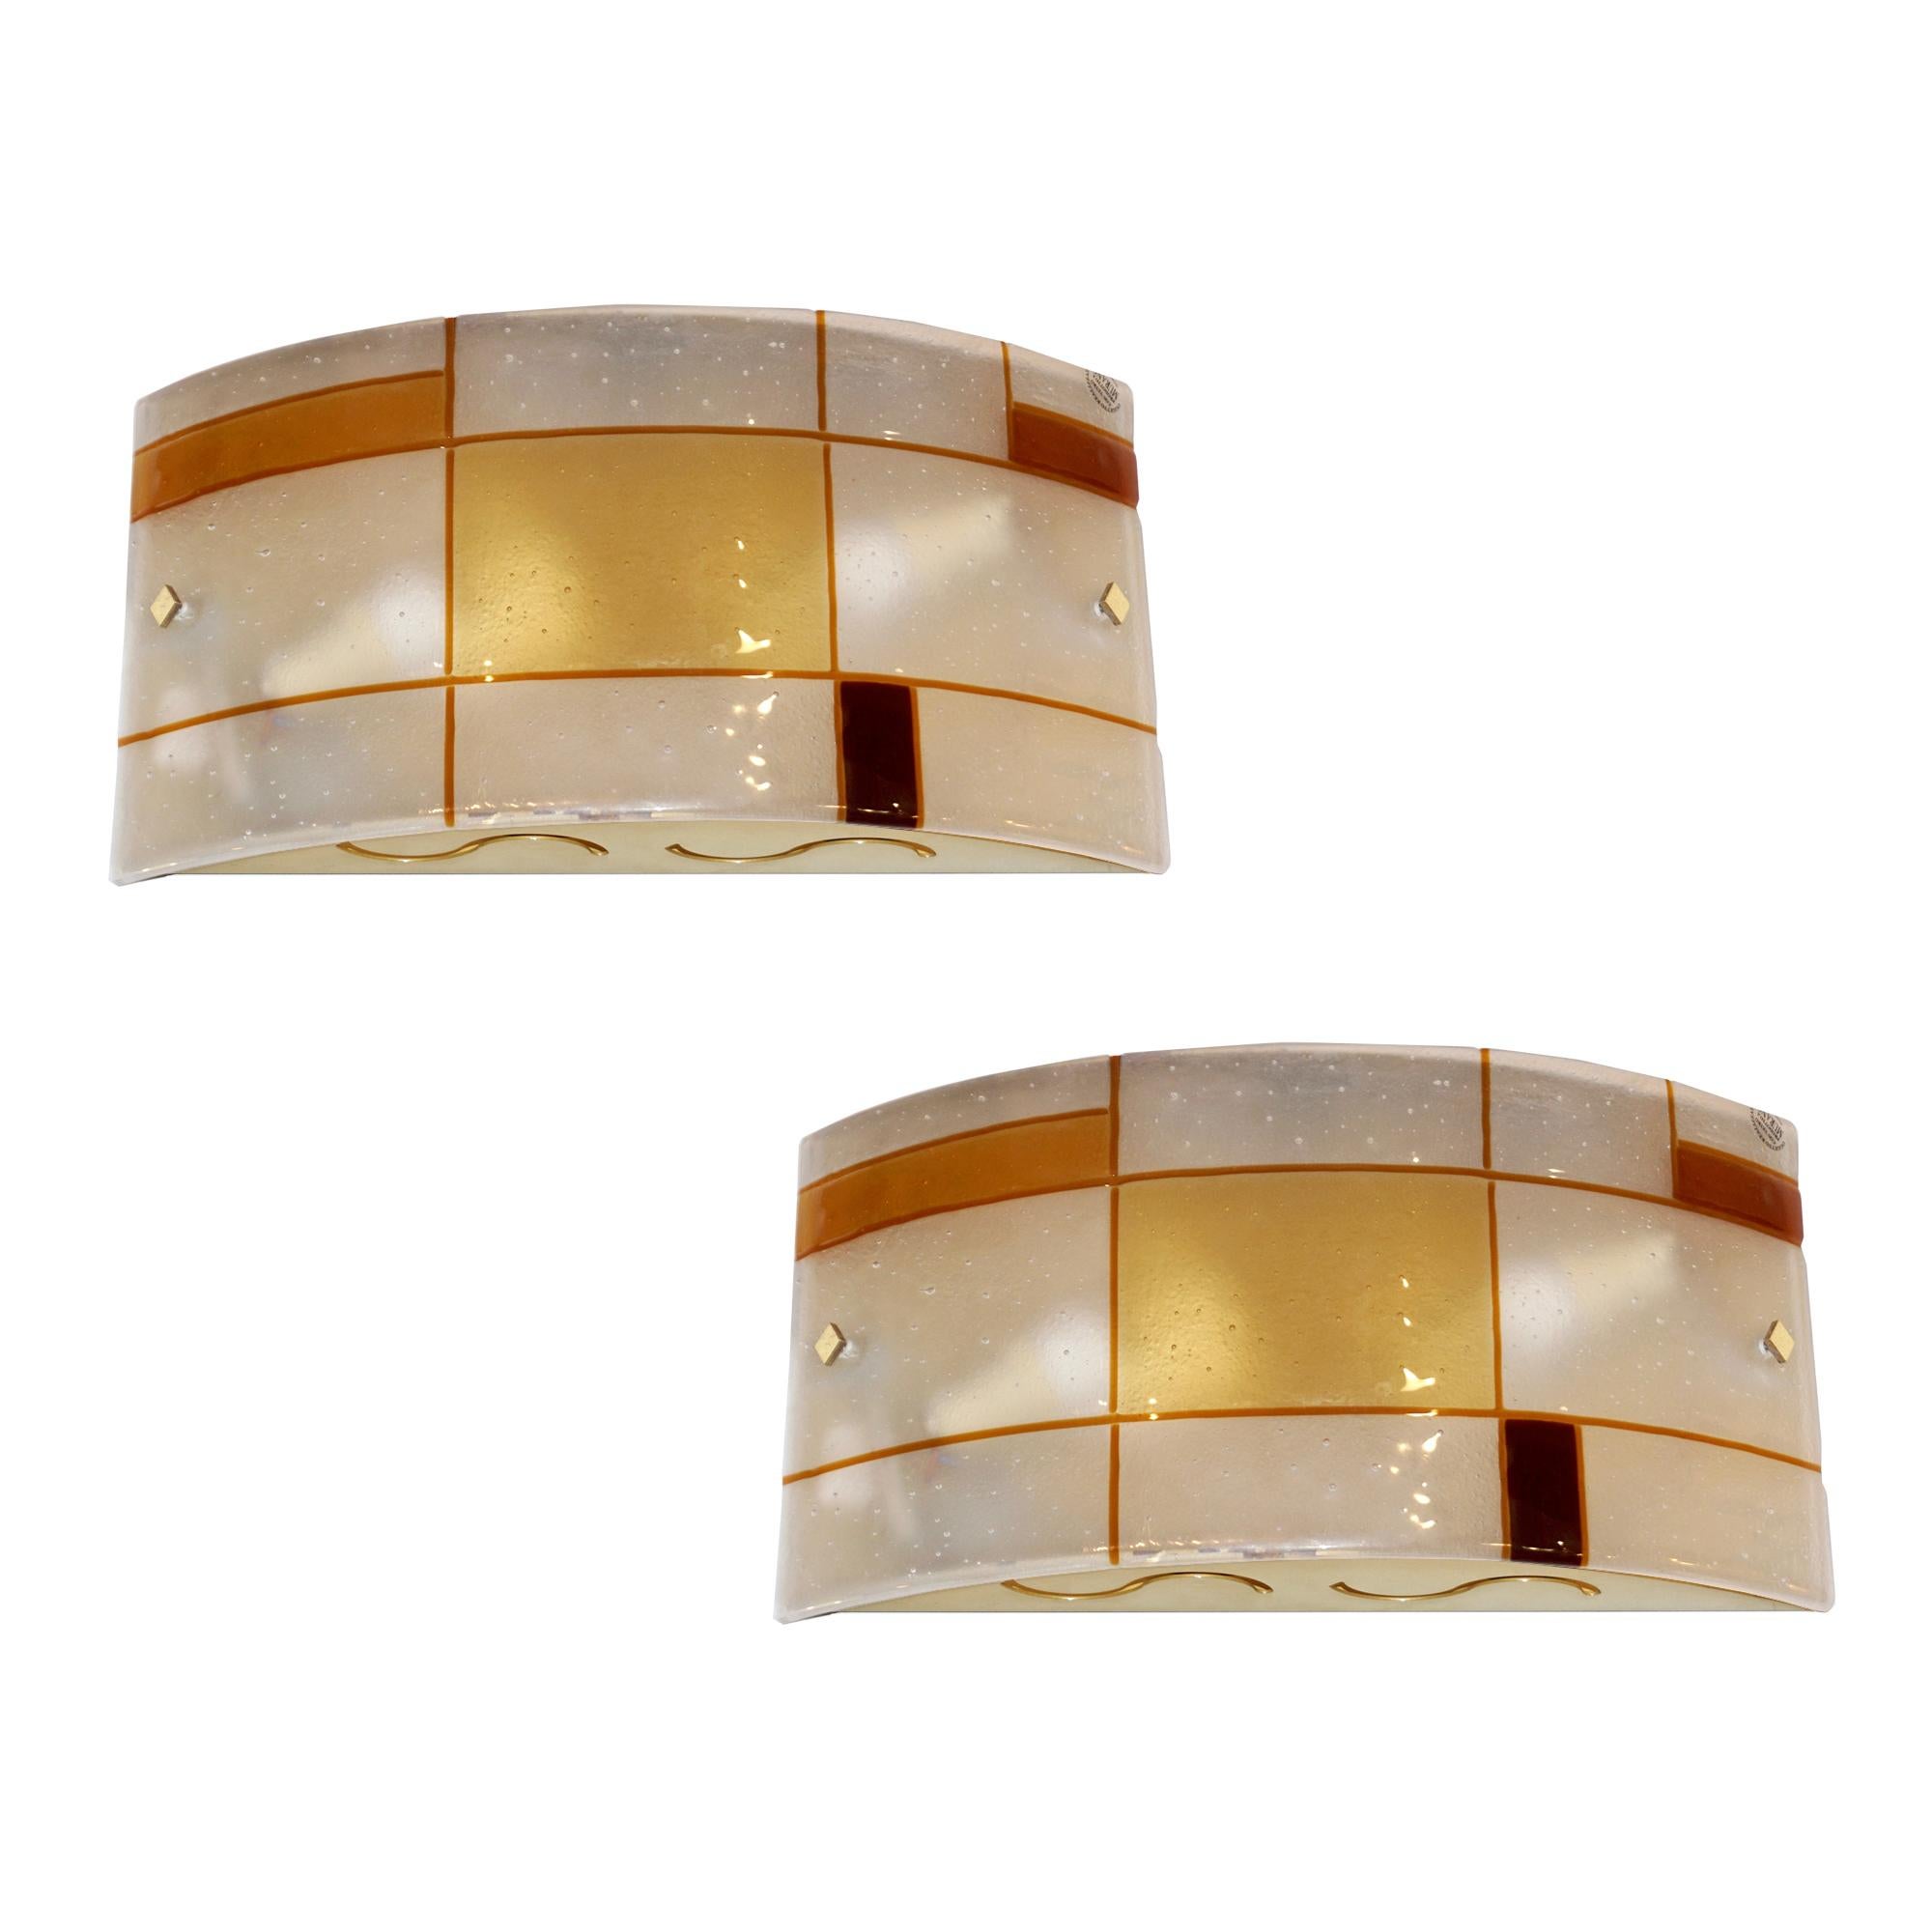 A set of 4 (2 pairs) available - vintage Mid-Century Modern Italian one-of-a-kind pair of handcrafted curved wall lights or flush mounts in high quality frosted Murano glass worked with the technique Pulegoso: numerous small bubbles that make the